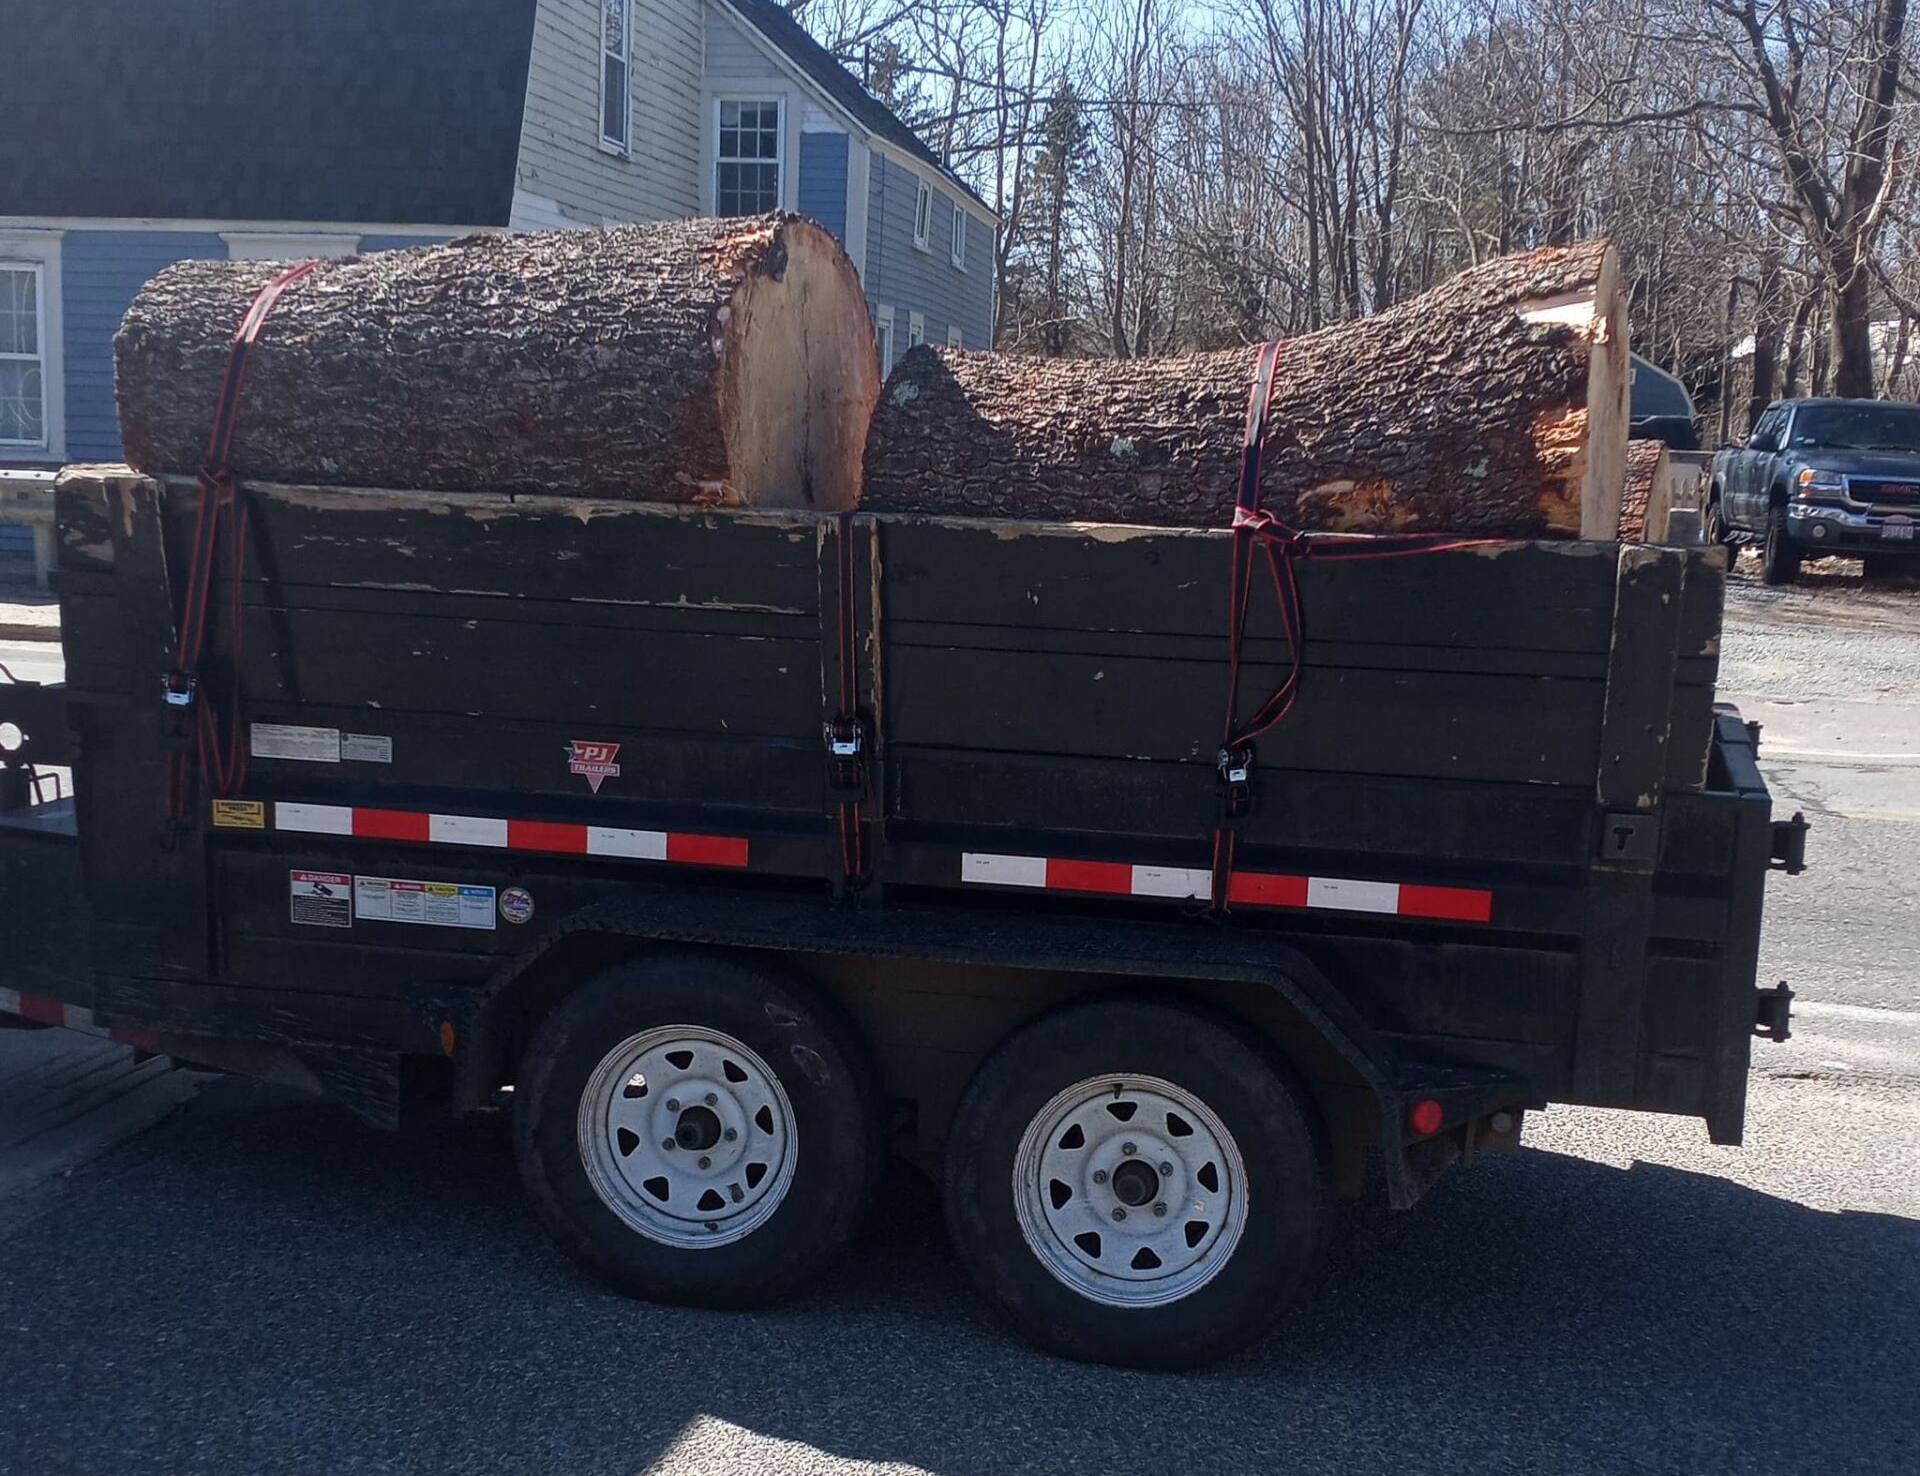 Wood that has been removed from a tree removal in Fall River is being broken down into firewood for our local community.